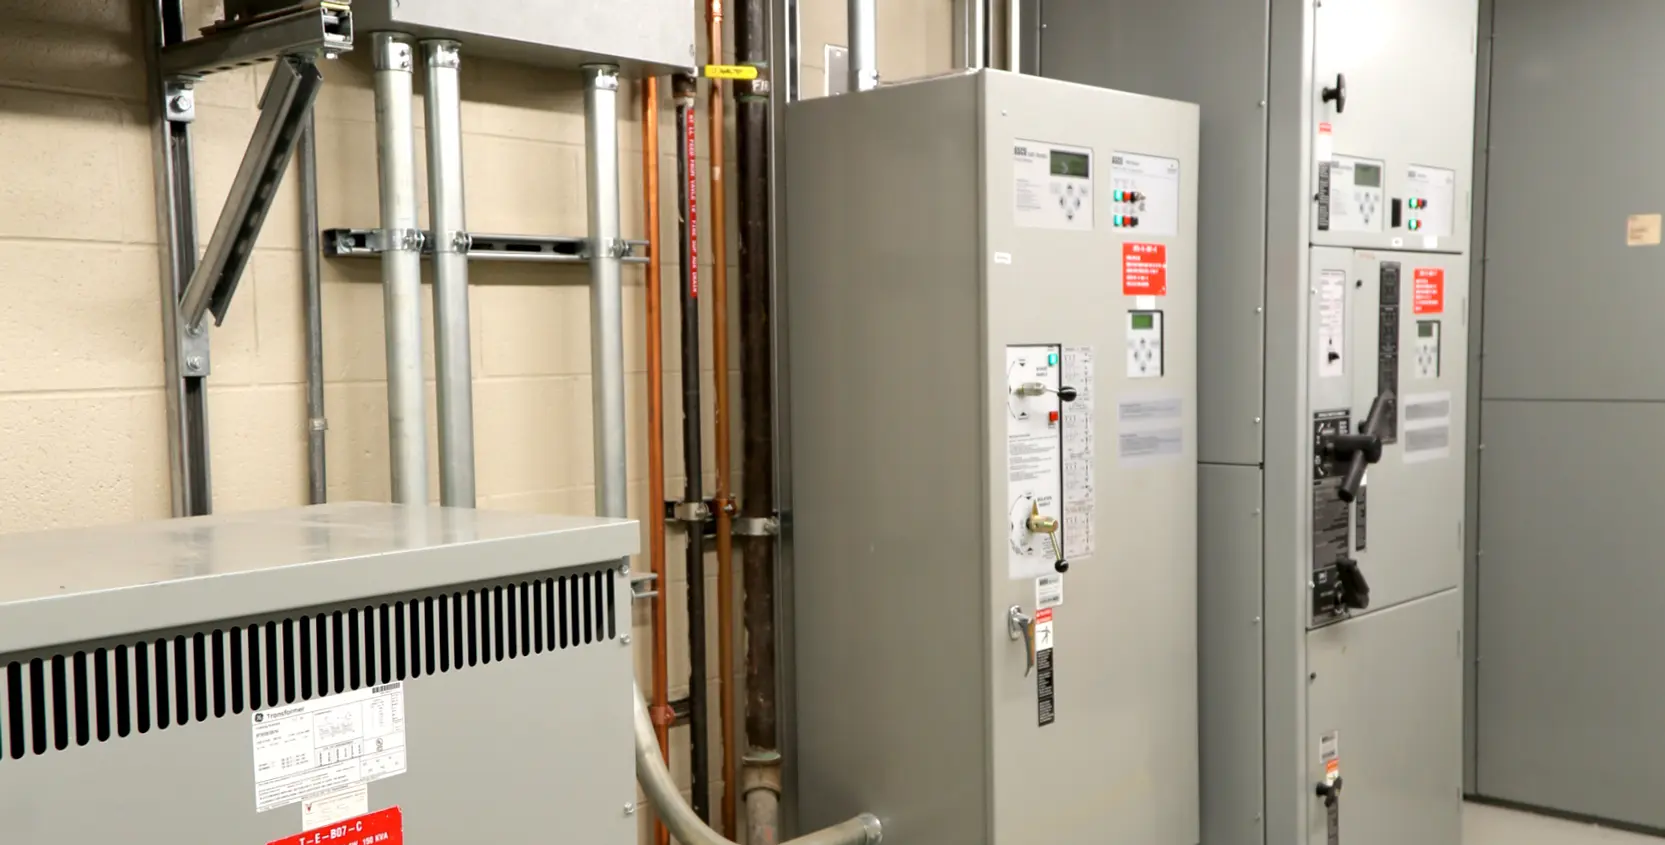 Beaumont-Royal-Oak-Emergency-Power-System-Upgrade-Electrical-1665x845